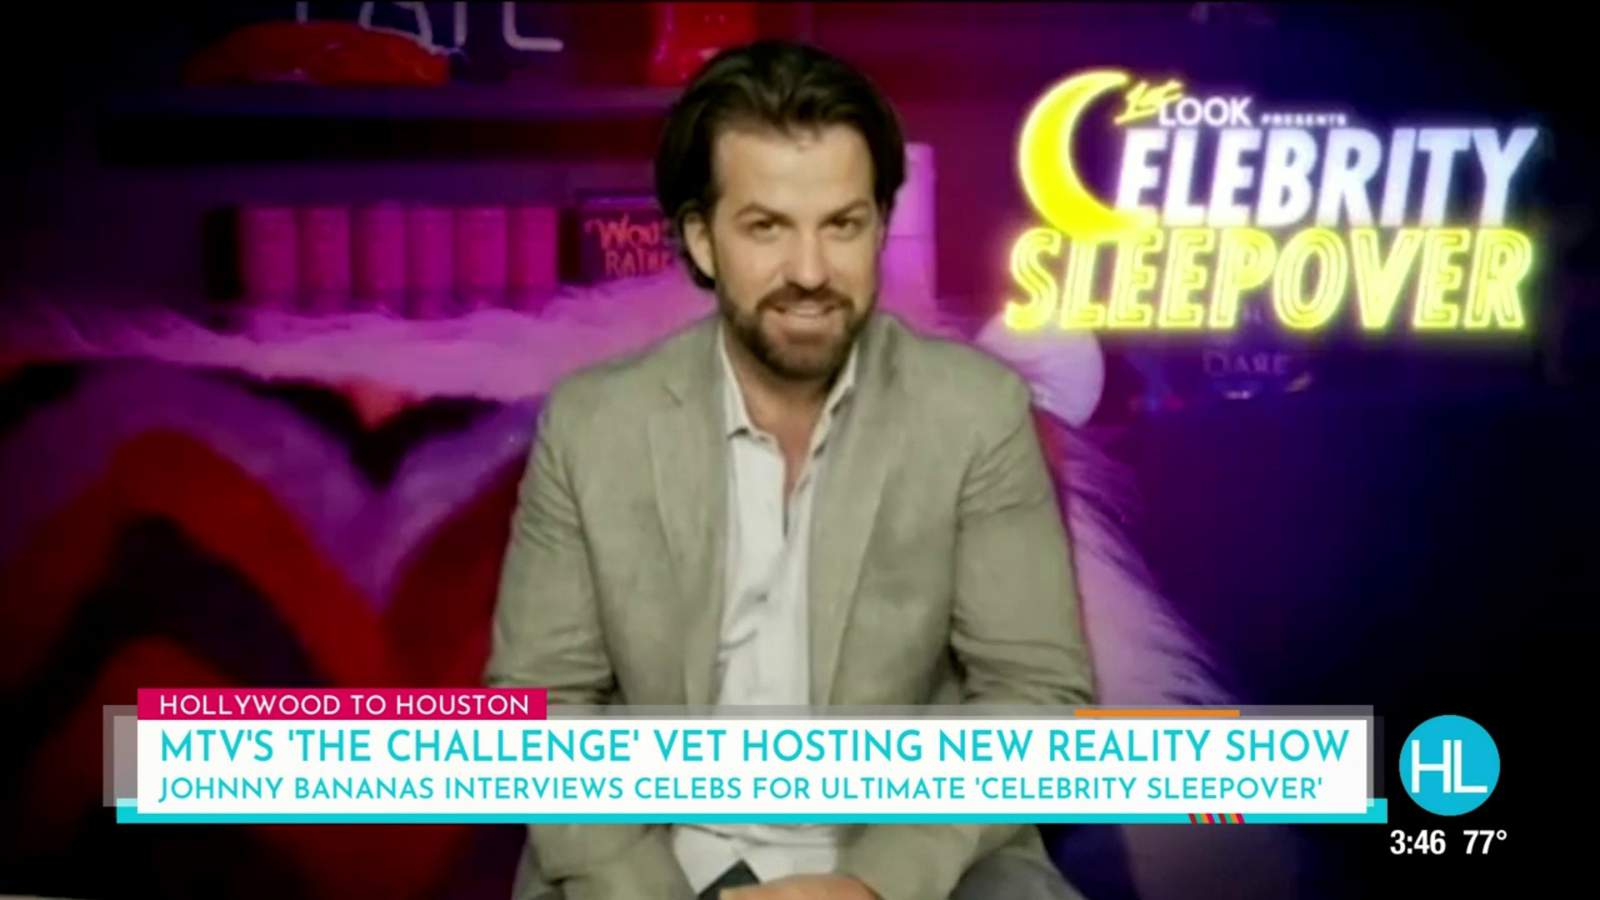 MTV’s ‘The Challenge’ vet Johnny Bananas chats about hosting new show ‘Celebrity Sleepover’